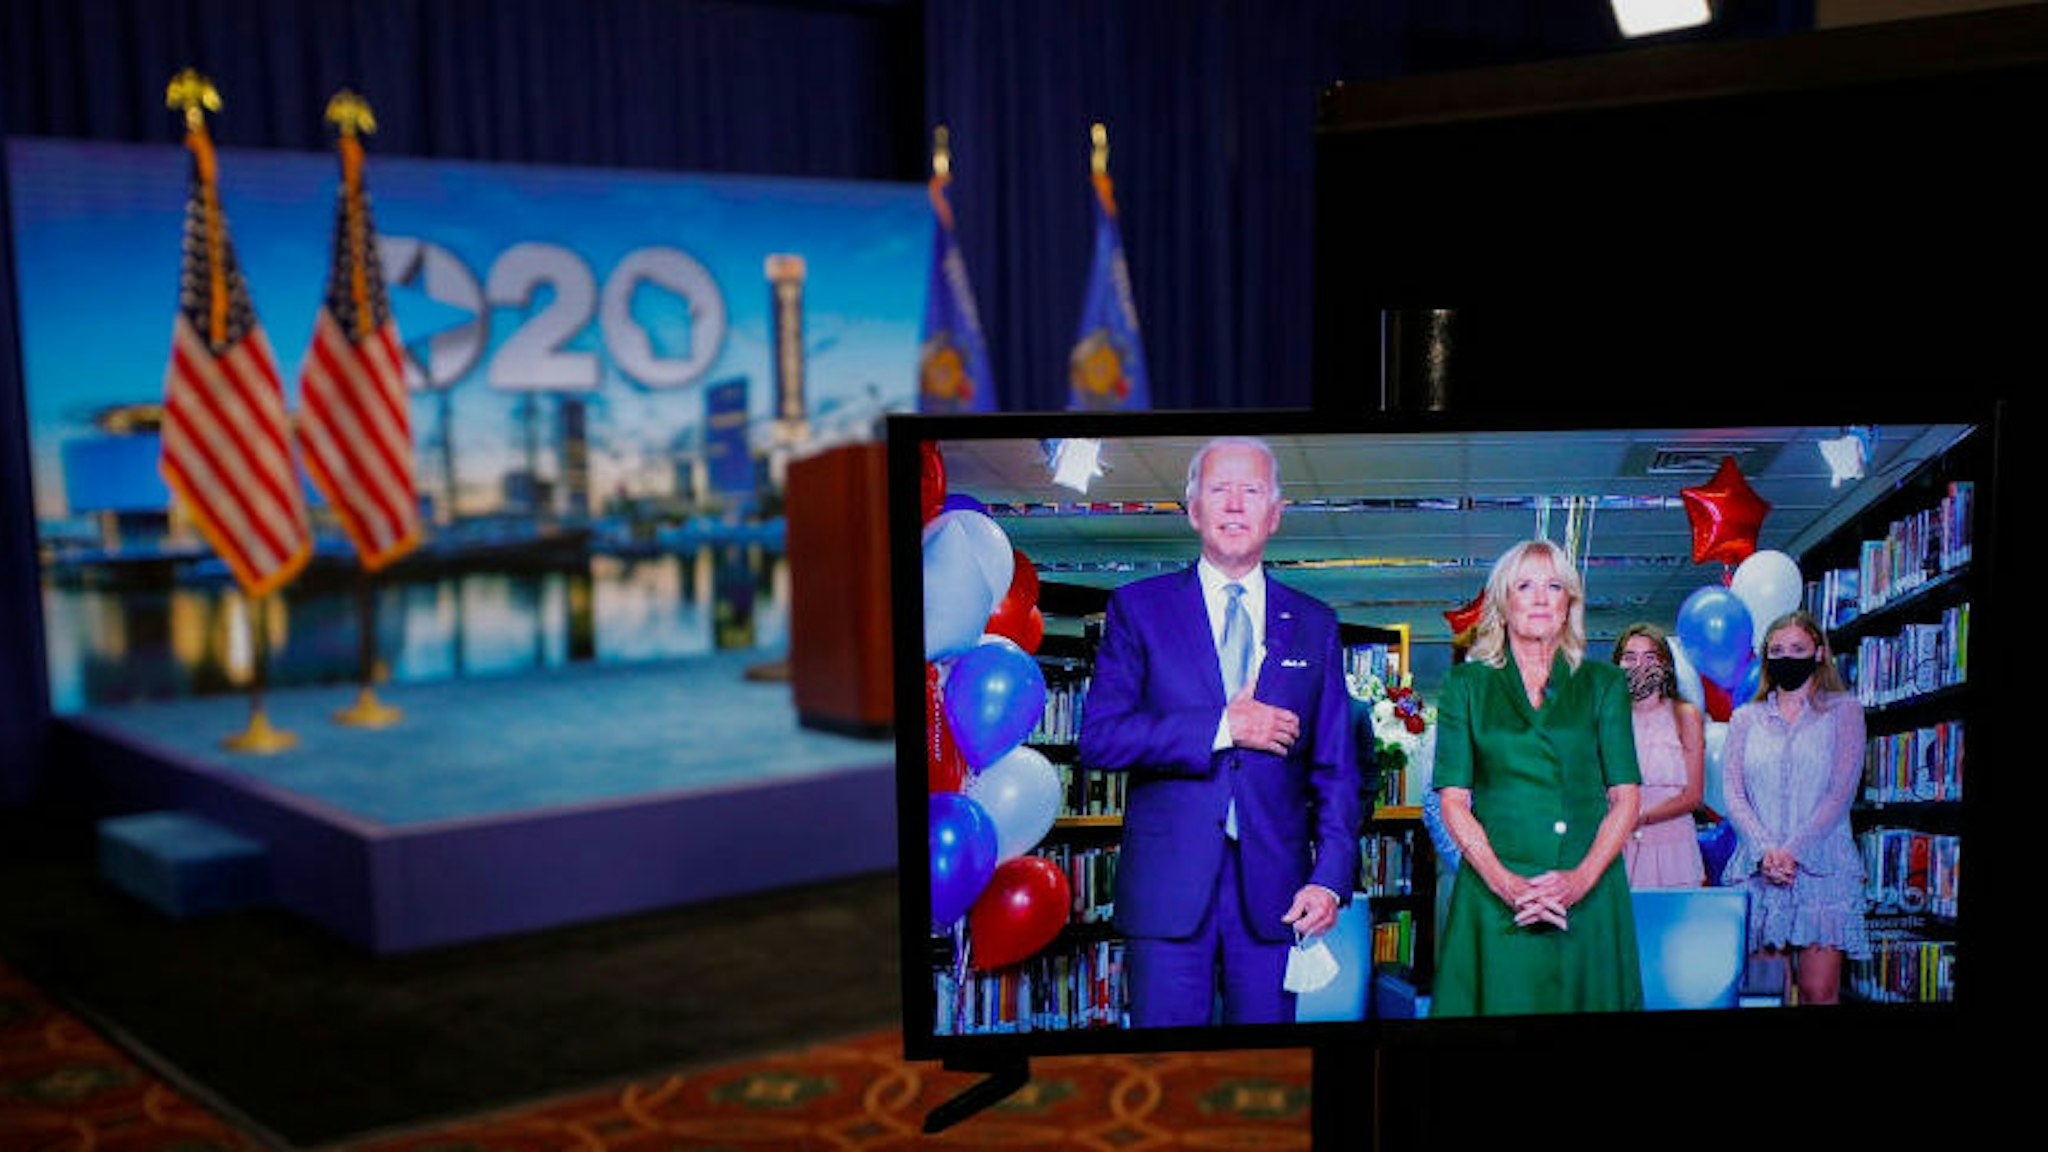 Democratic 2020 presidential nominee and former Vice President Joe Biden is seen in a video feed from Delaware as he reacts with his wife Jill and his grandchildren at his side after winning the votes to become the Democratic Party’s 2020 nominee for president during the second night of the 2020 Democratic National Convention as seen at the Wisconsin Center in Milwaukee, Wisconsin, U.S., August 18, 2020. REUTERS/Brian Snyder/Pool